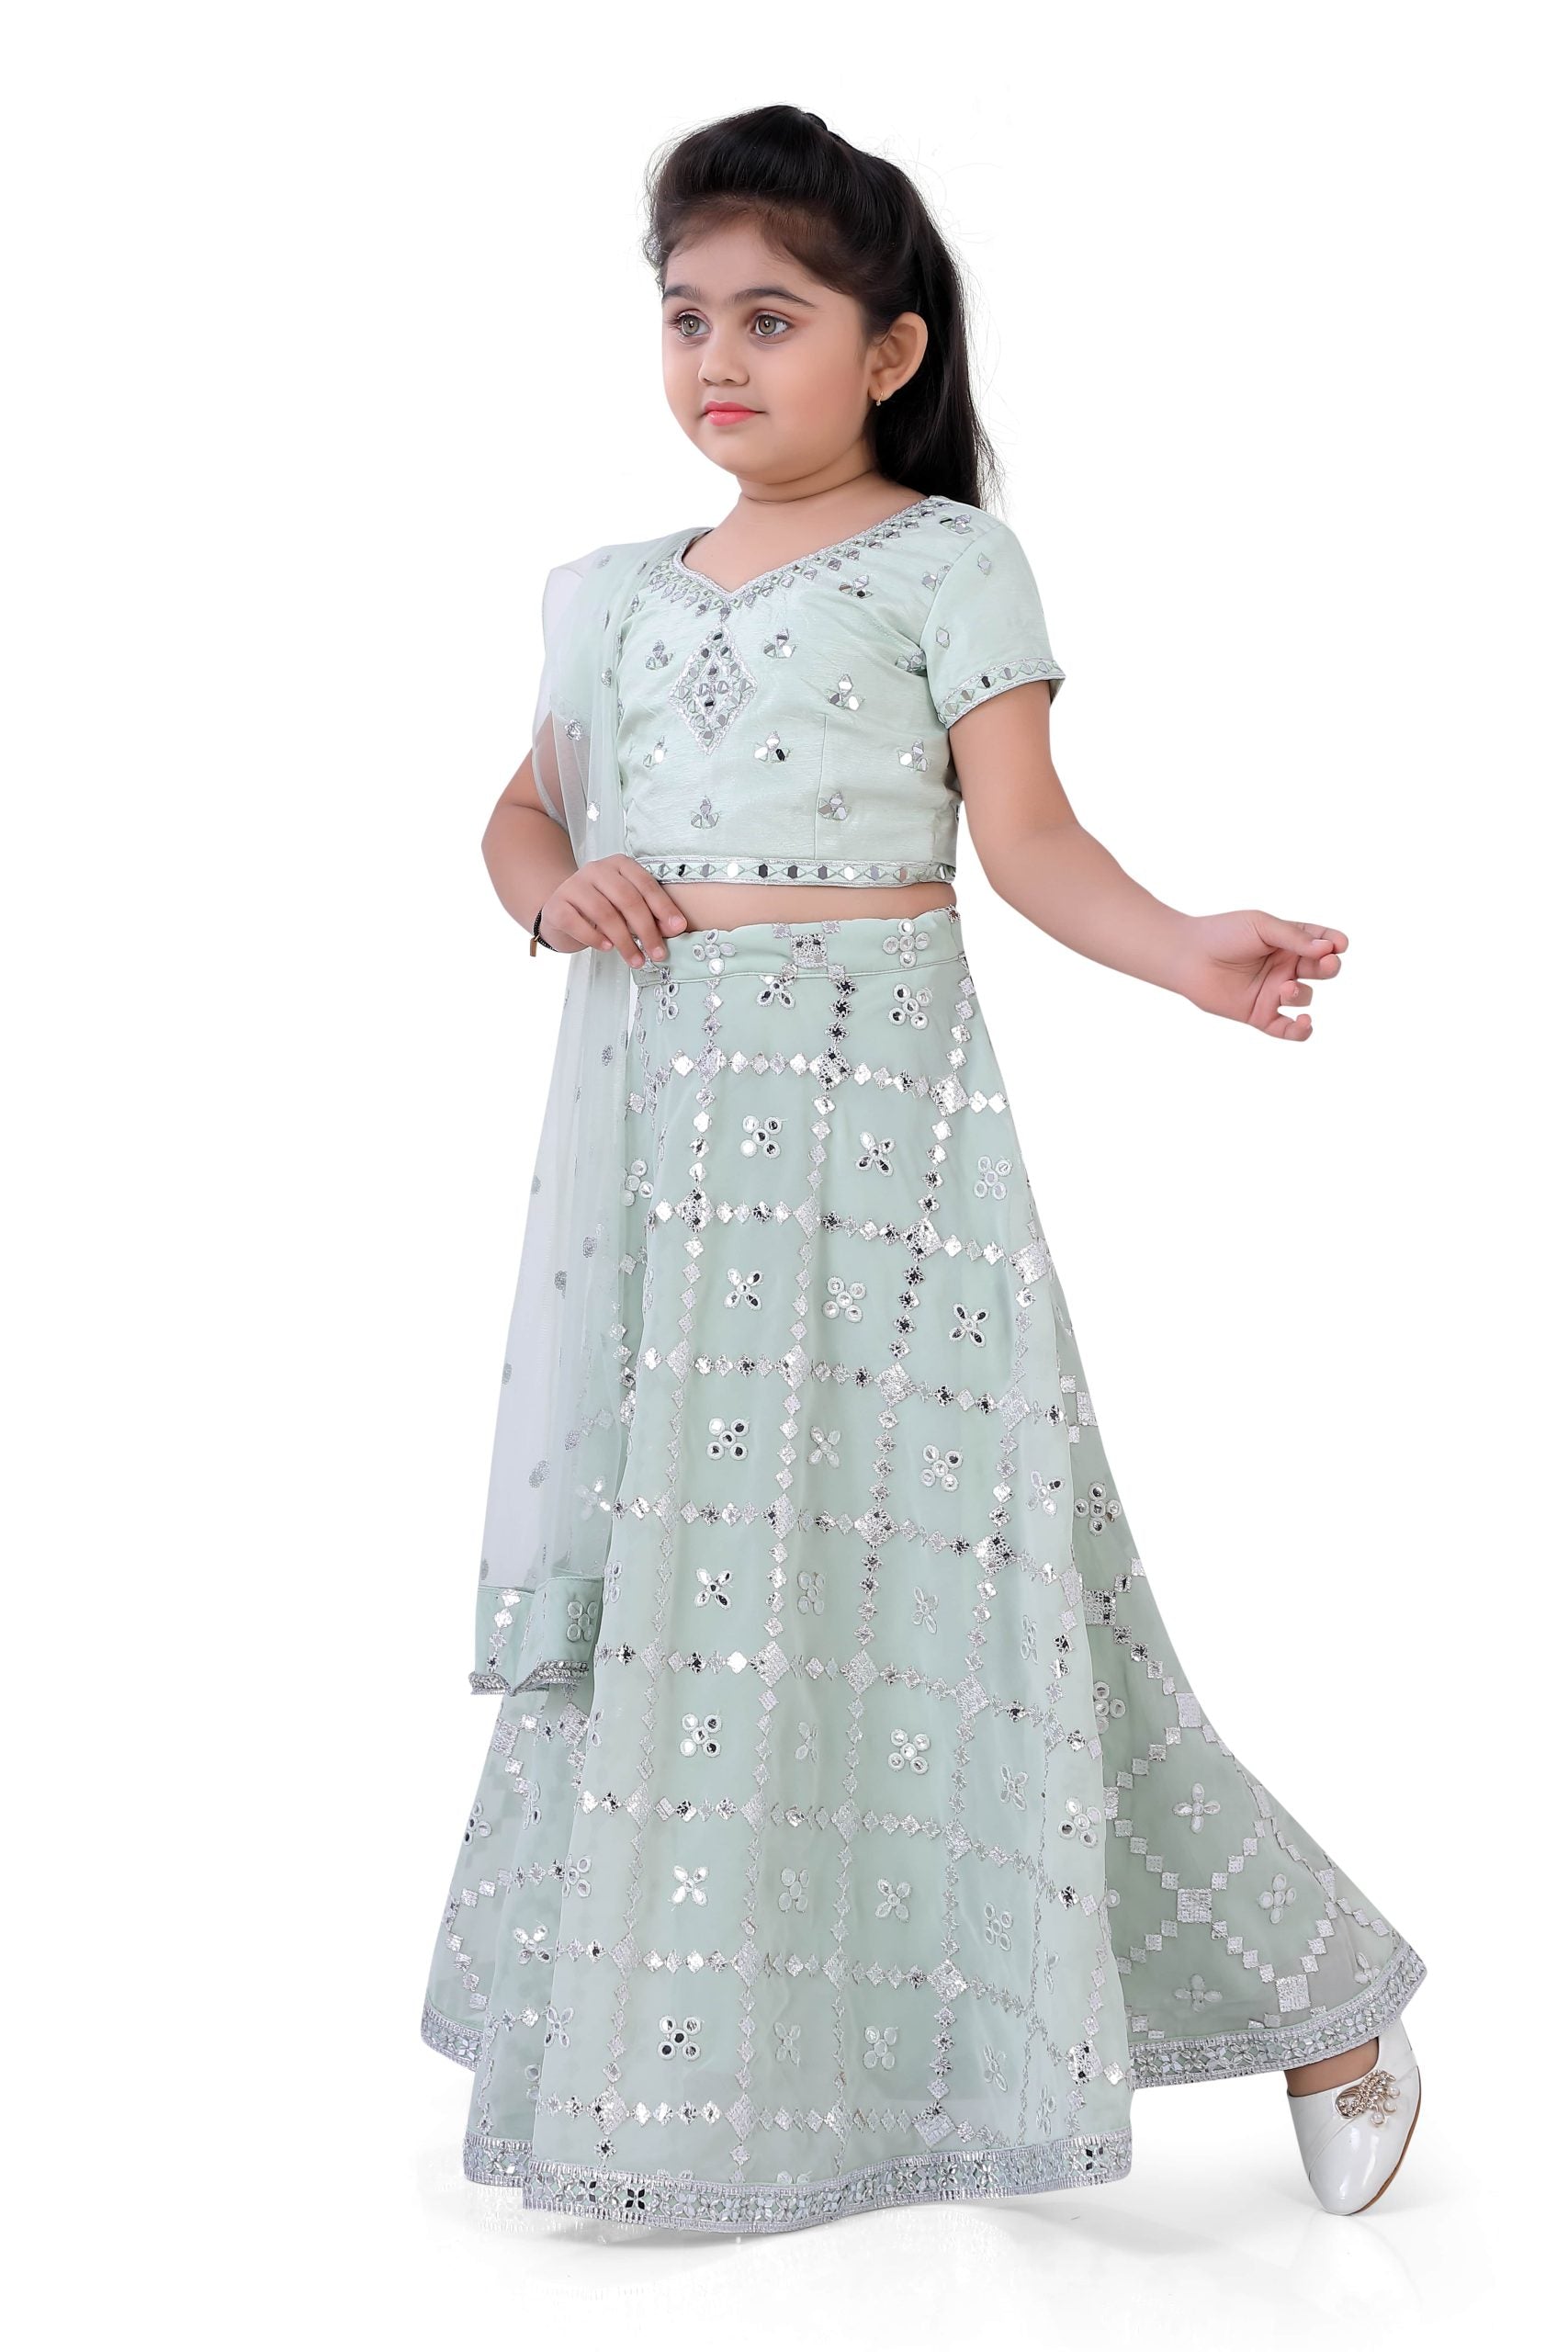 Faux Abhla Mirror Work Top And Ghaghra Set For Girls